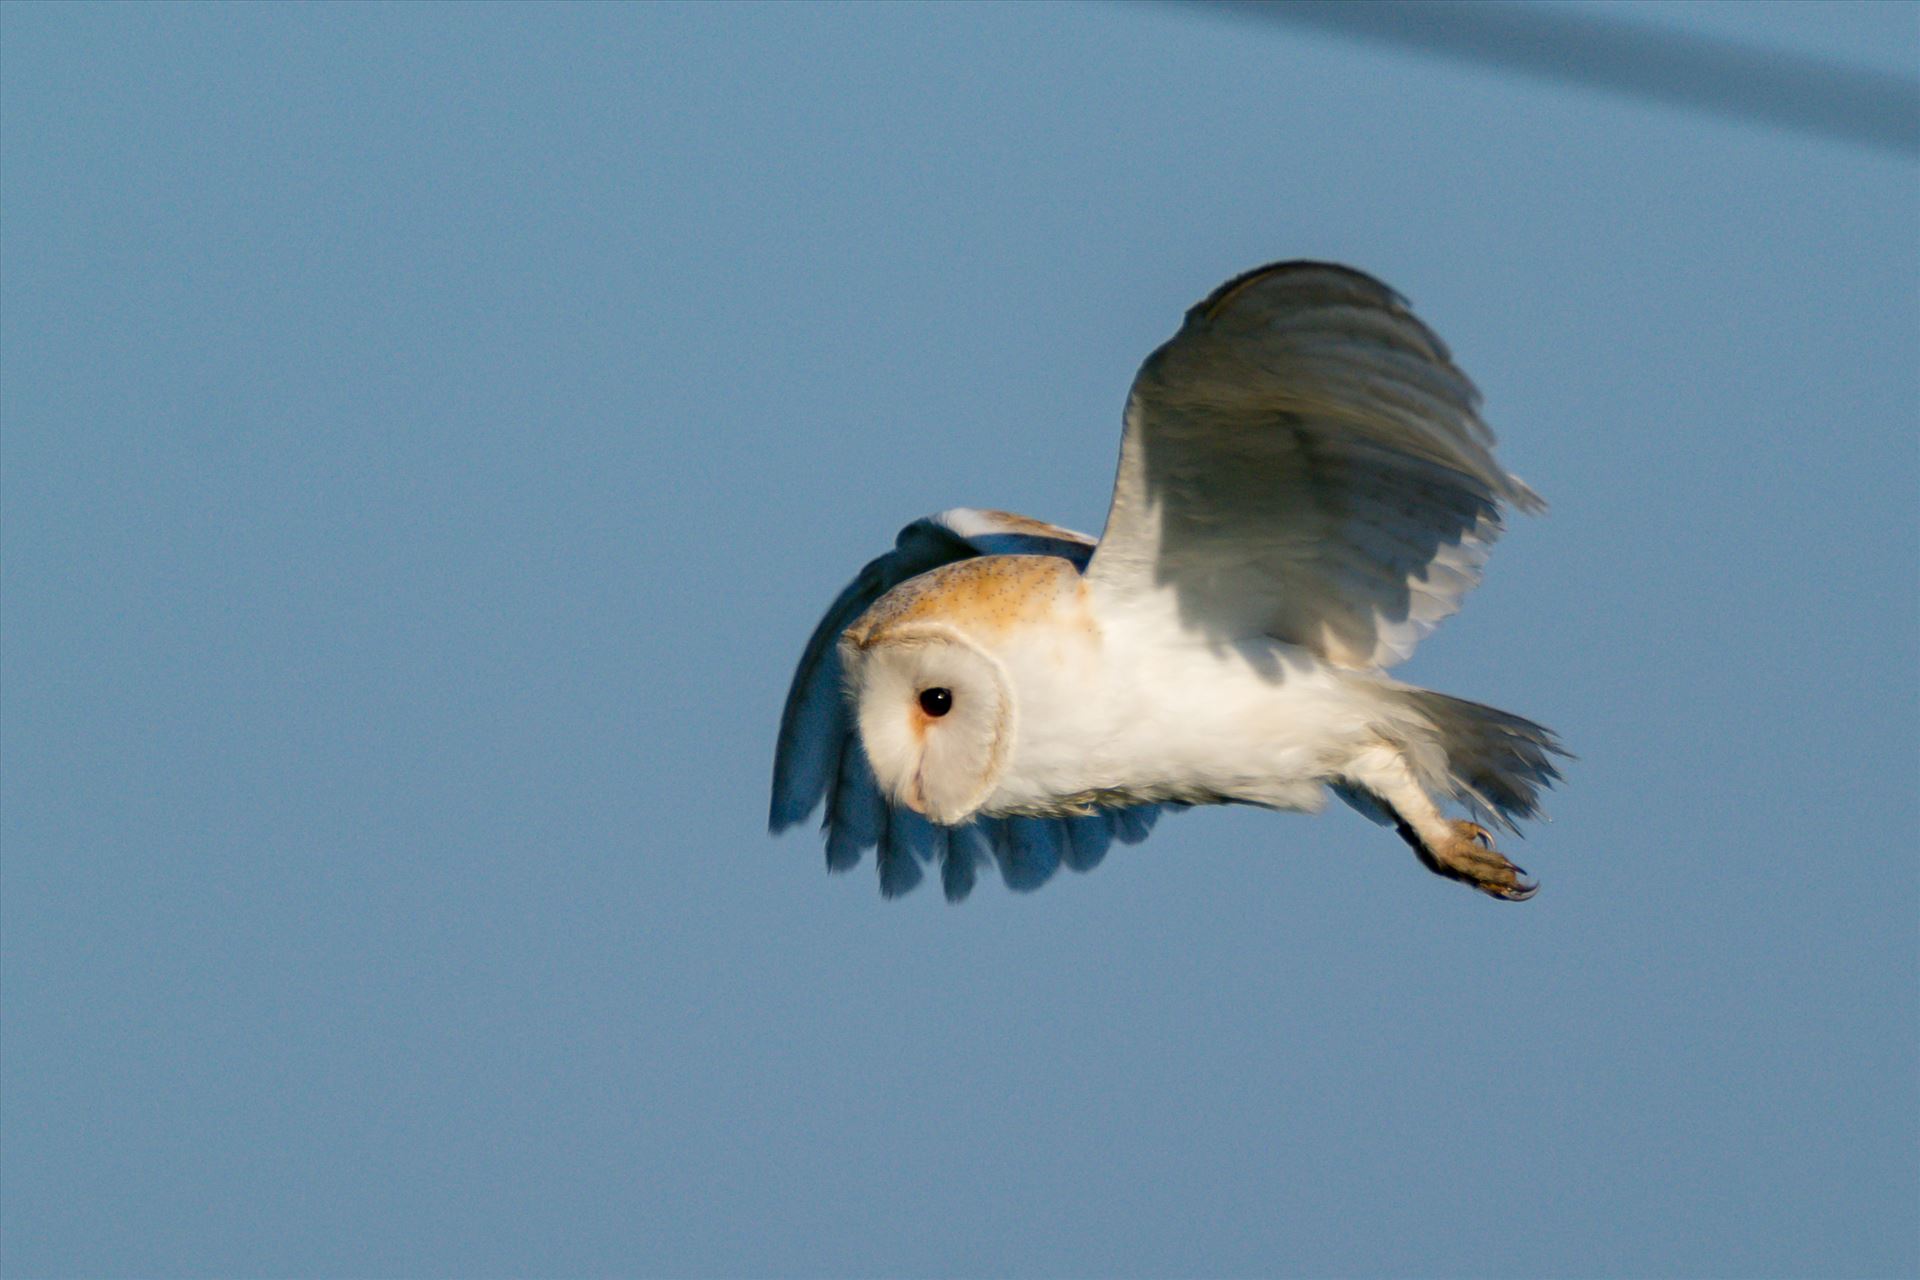 Barn Owl on the hunt 03 A Barn Owl on the hunt for its breakfast by AJ Stoves Photography